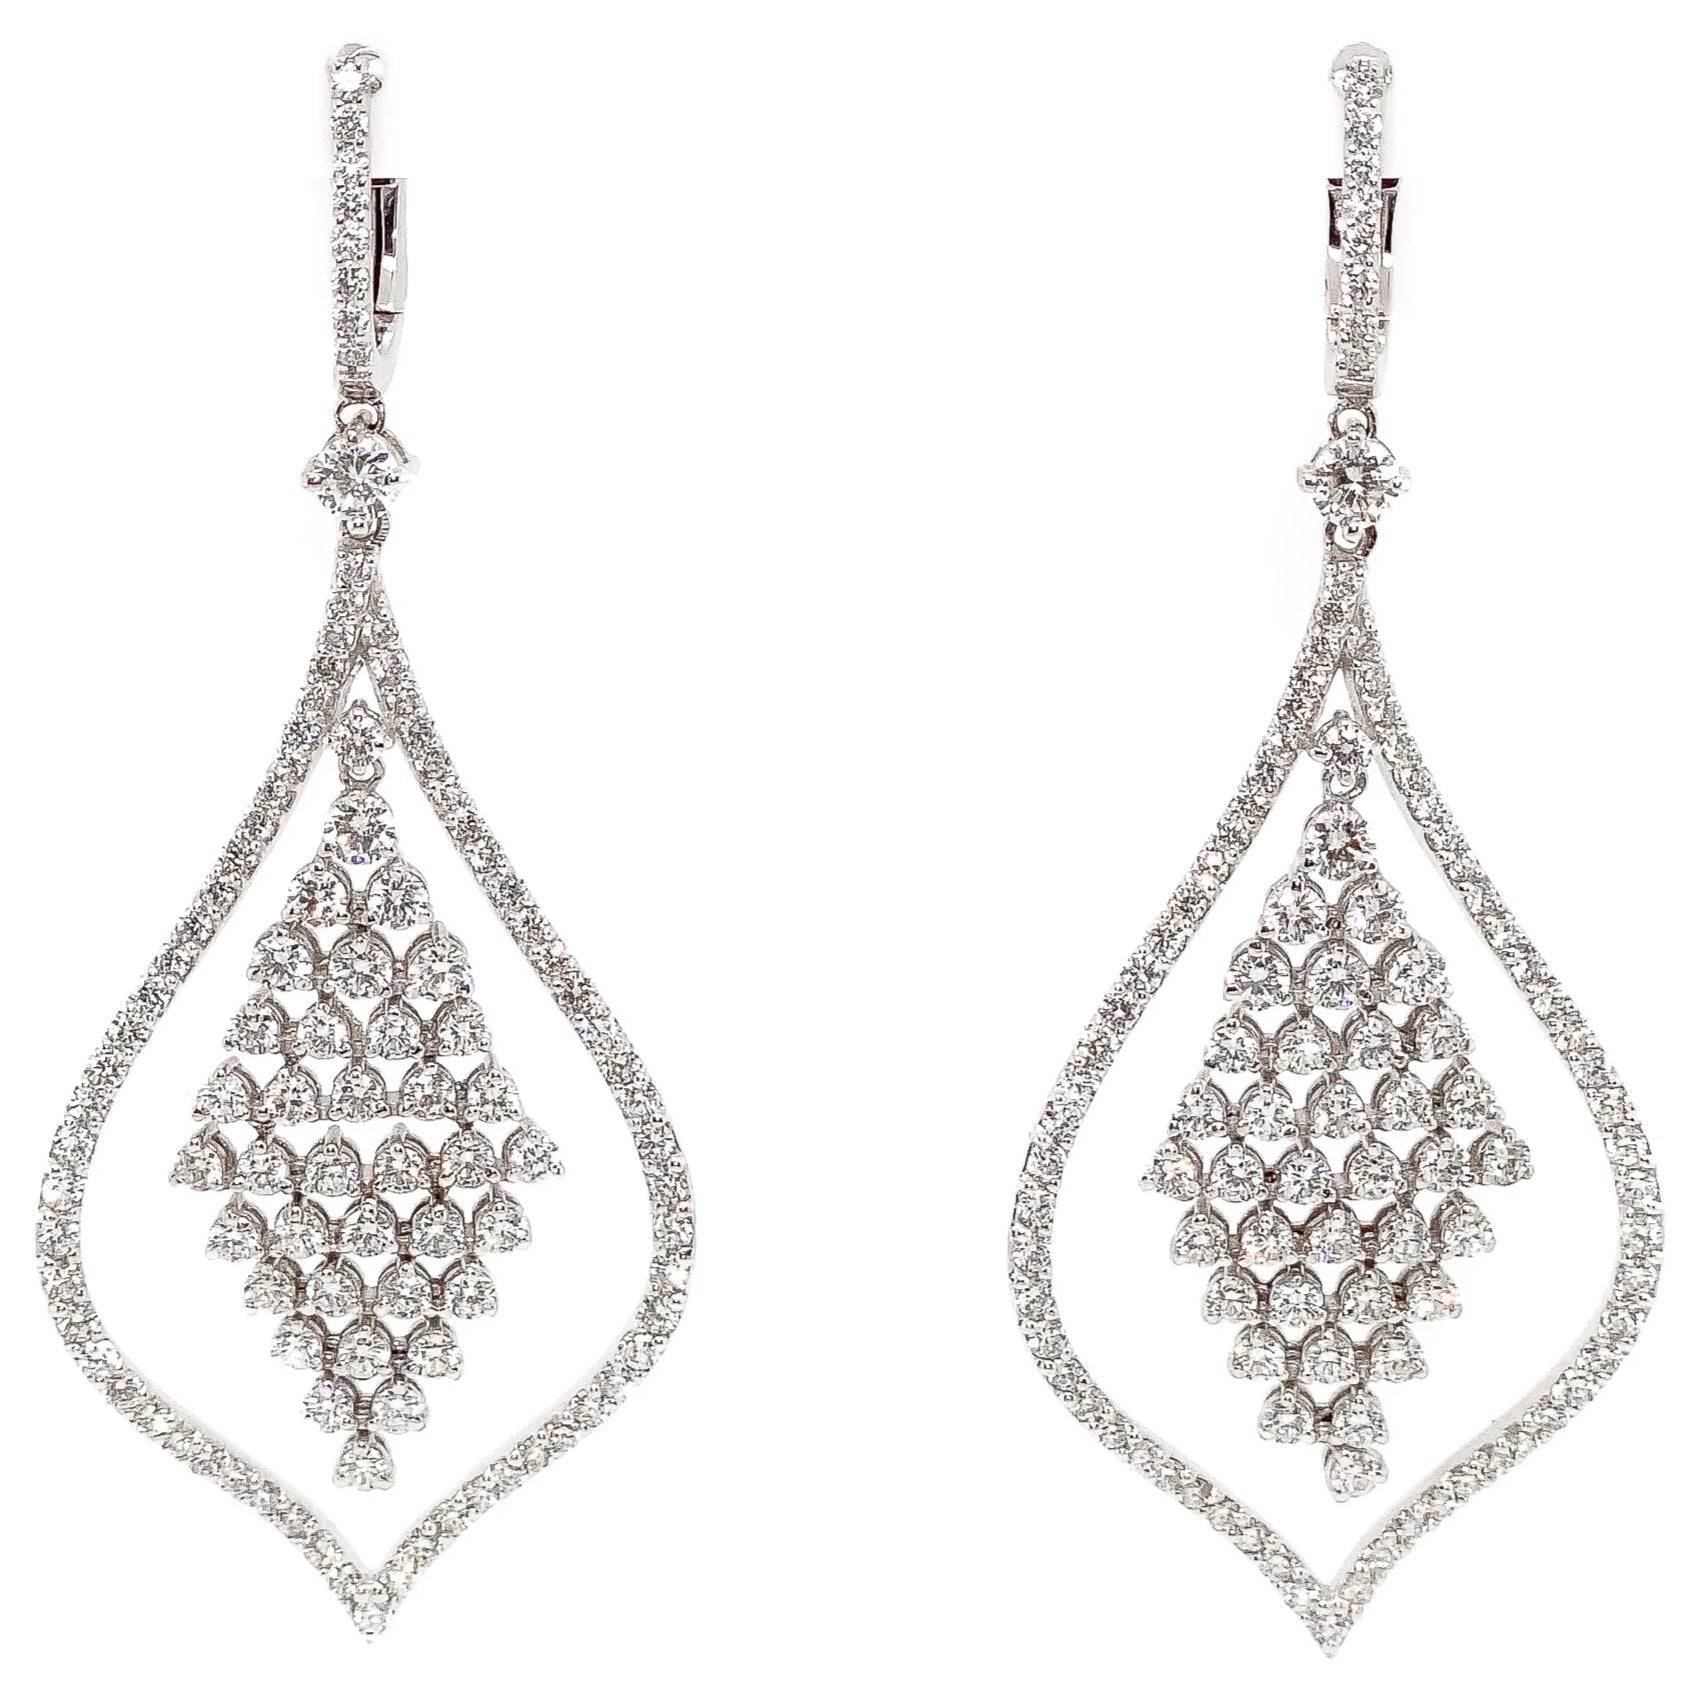 14k White Gold Chandelier Earrings with 4.75cts